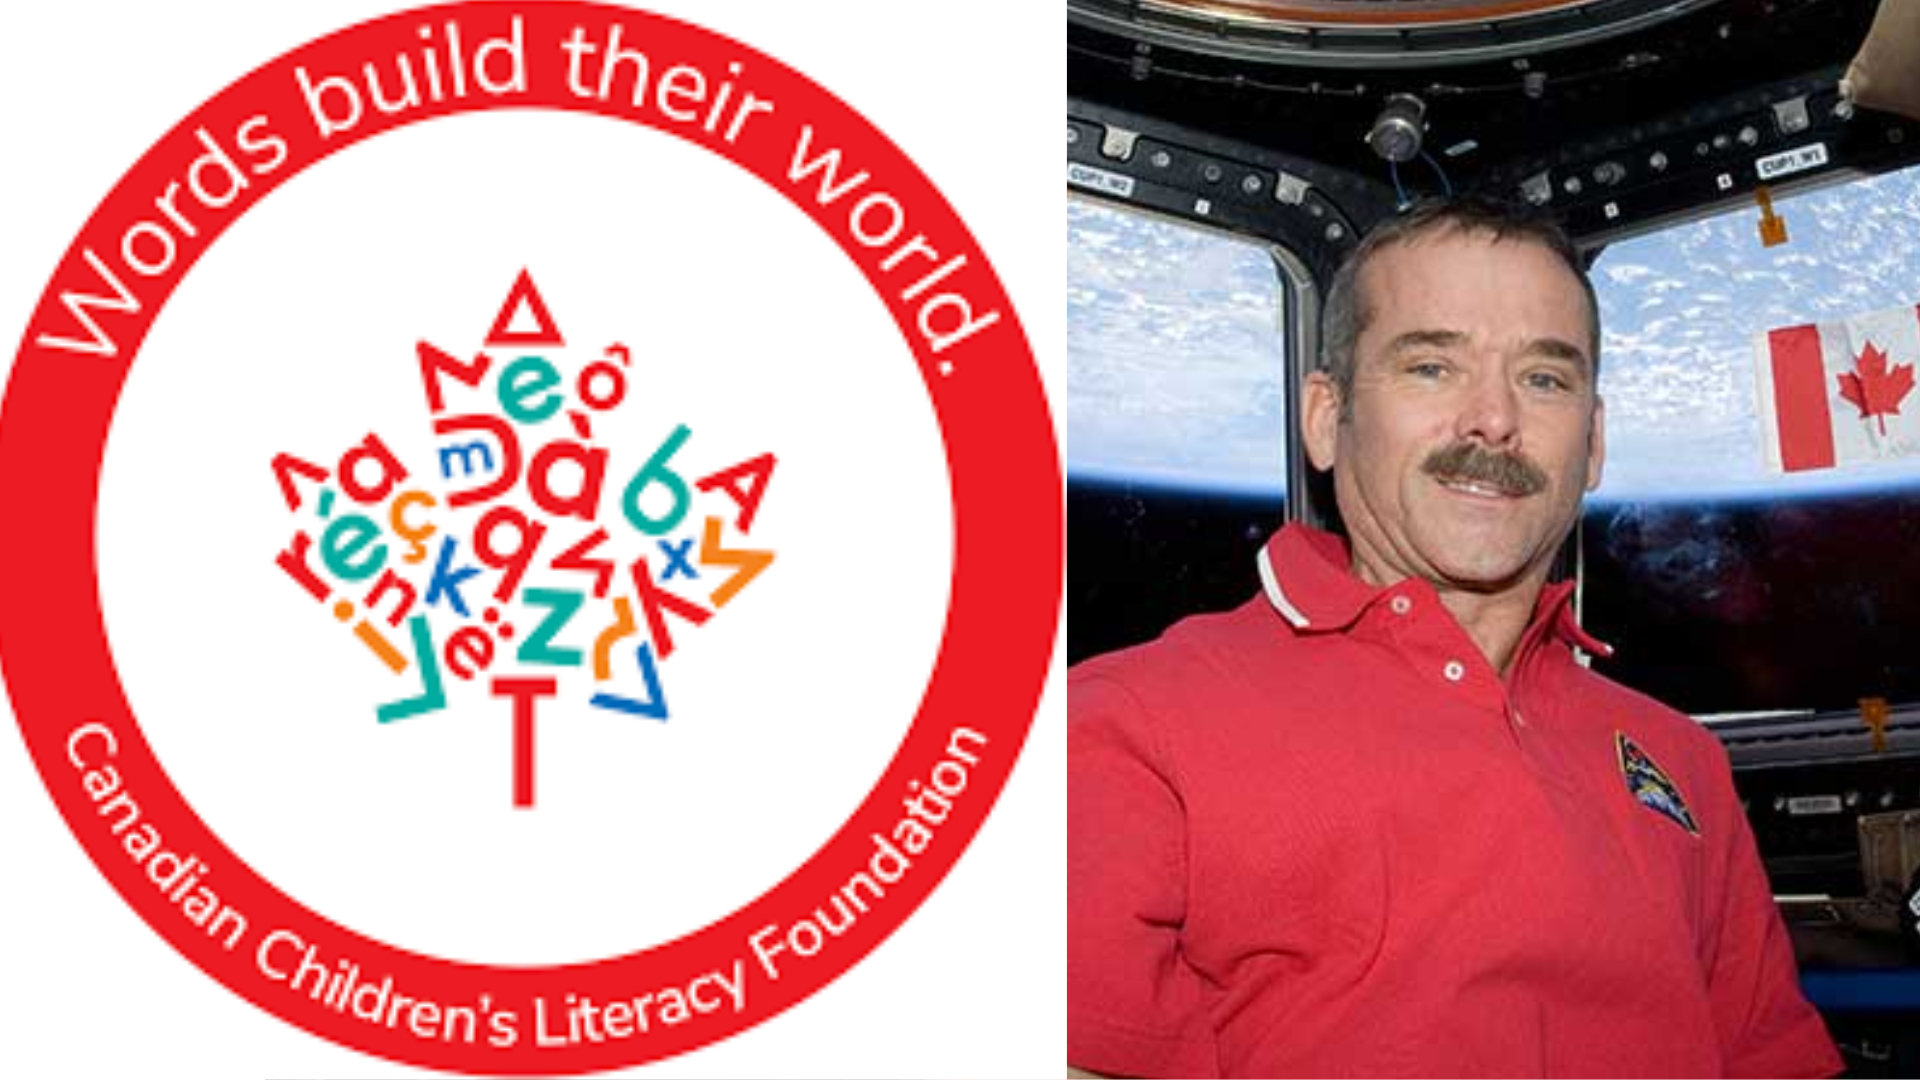 Colonel Chris Hadfield on a new digital exhibit close to his heart